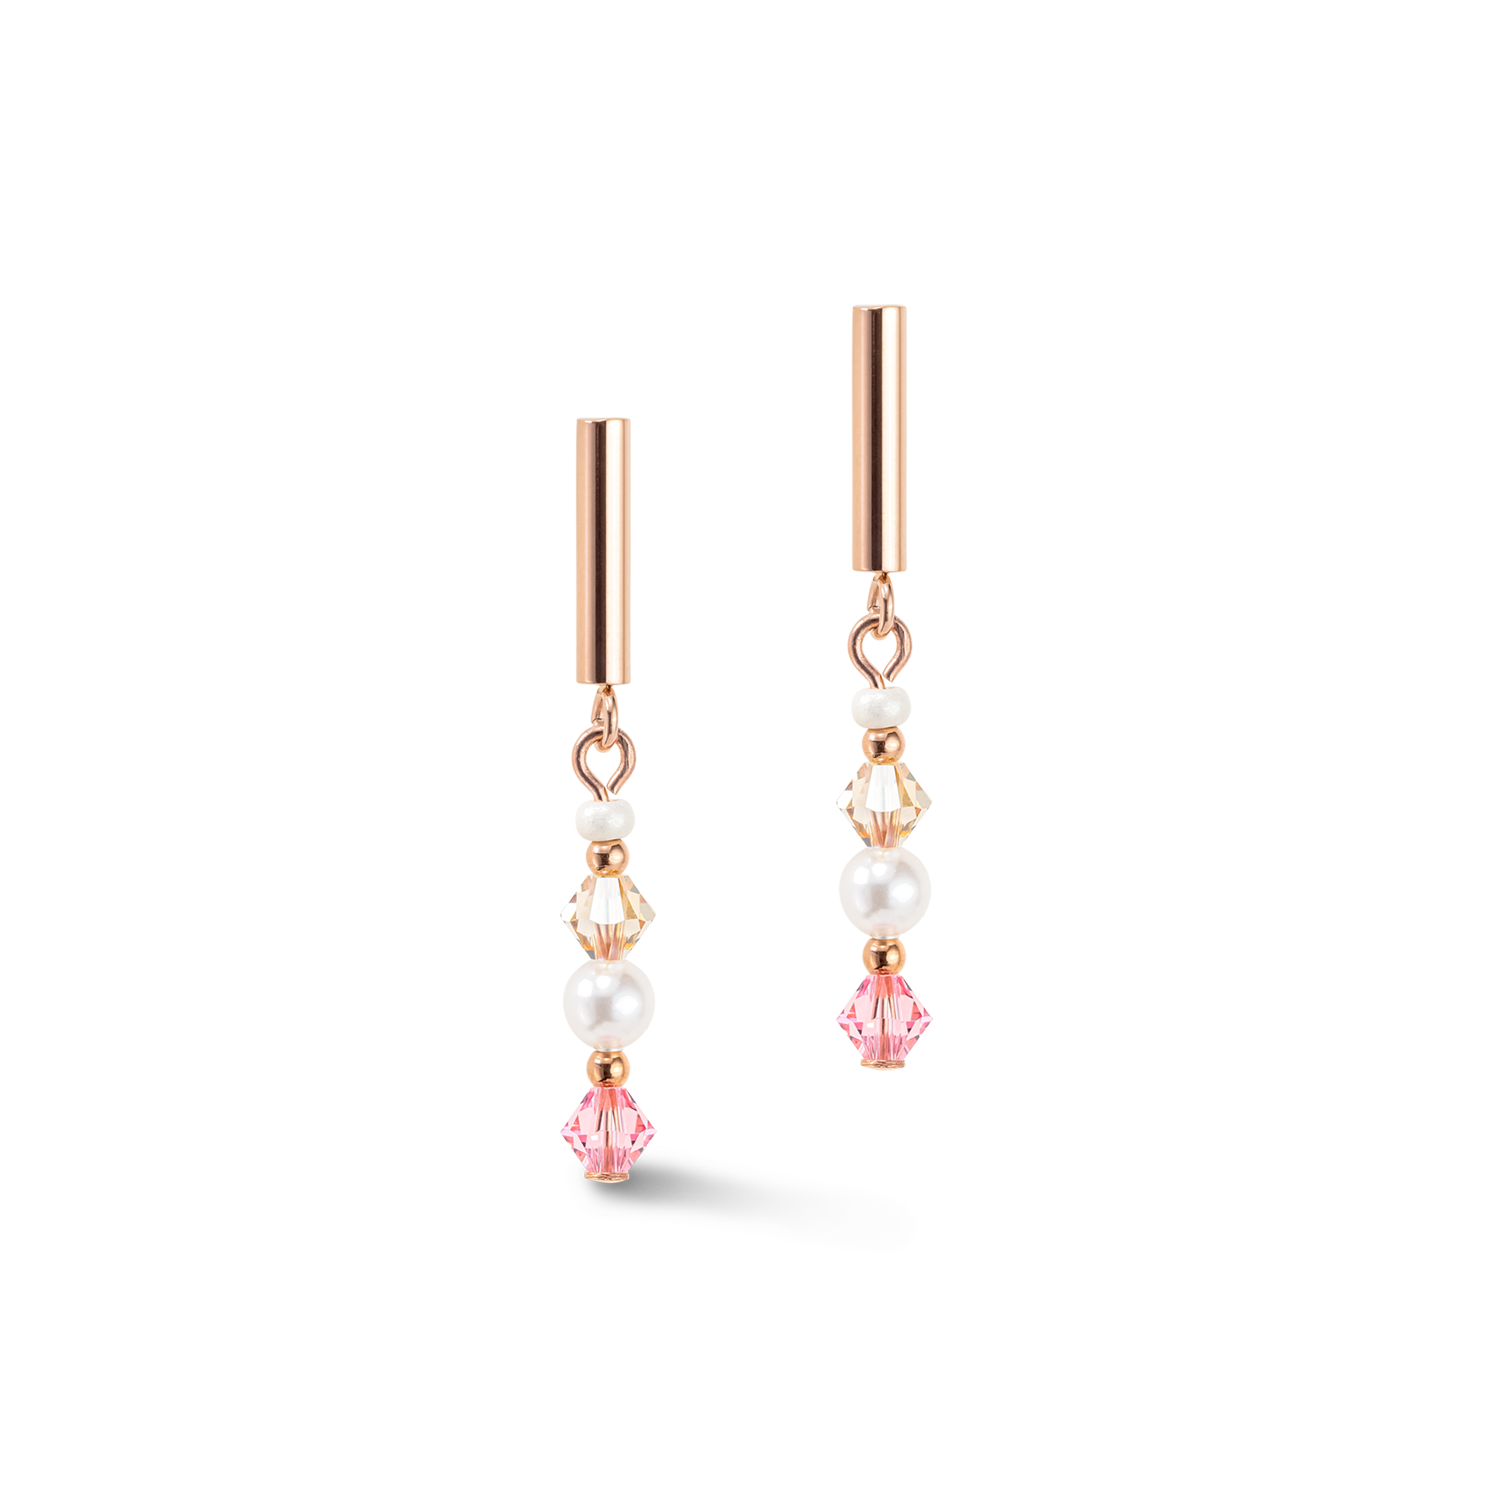 Boucles d'oreille Princess Pearls or rose rose clair